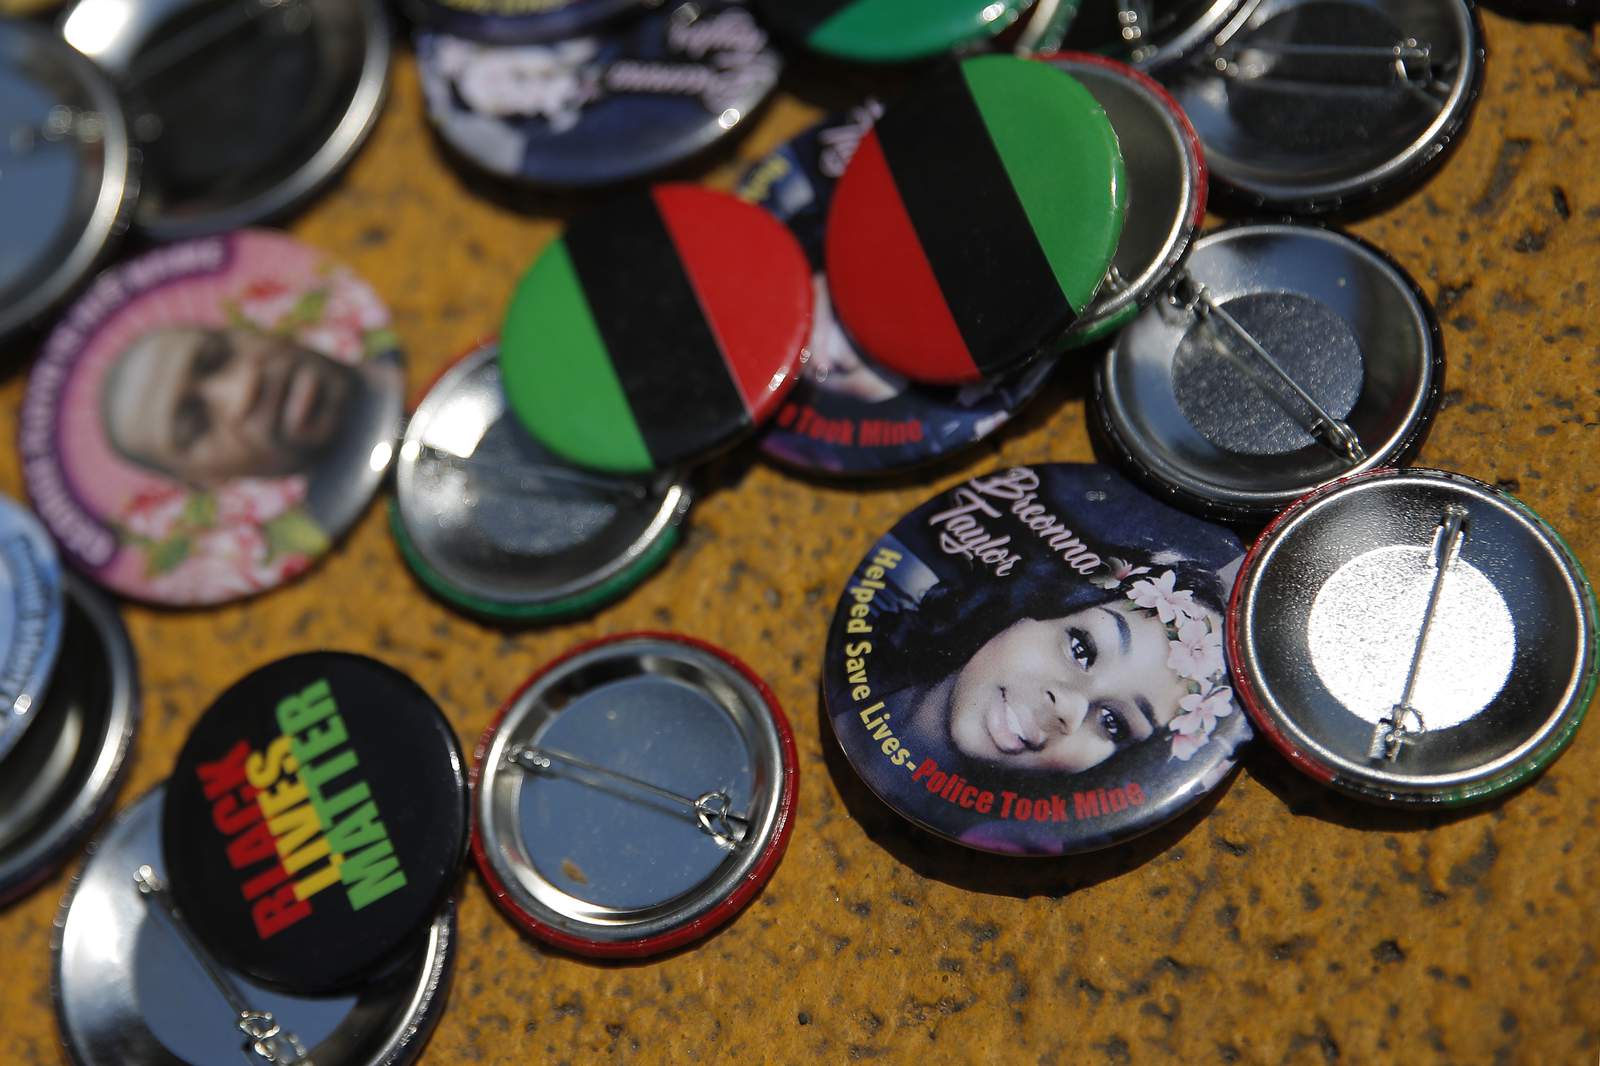 American Airlines OKs Black Lives Matter pins for employees